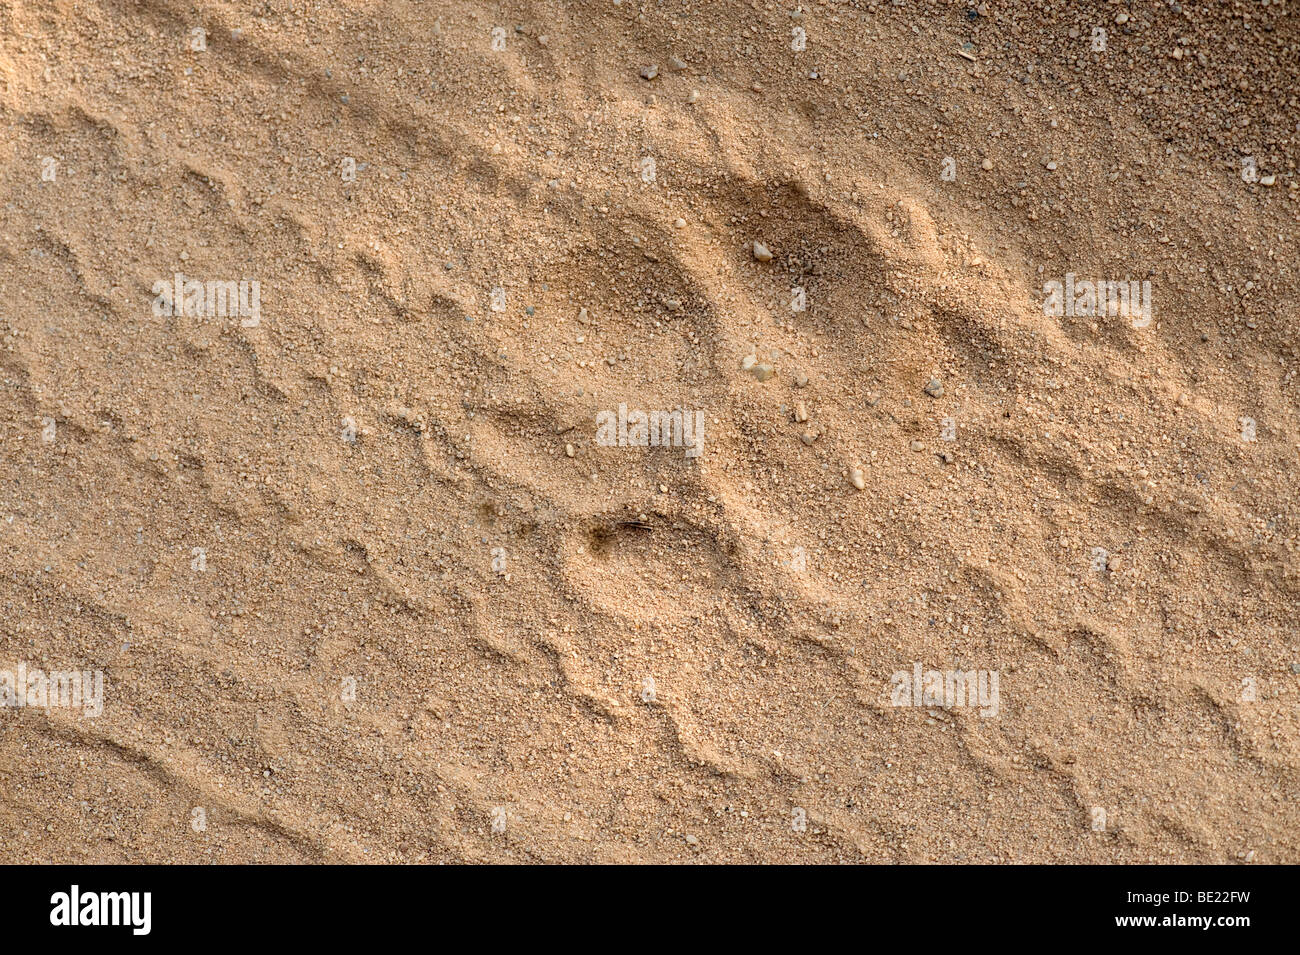 Tiger paw print in sand with car jeep tyre tracks Bandhavgarh National Park Stock Photo